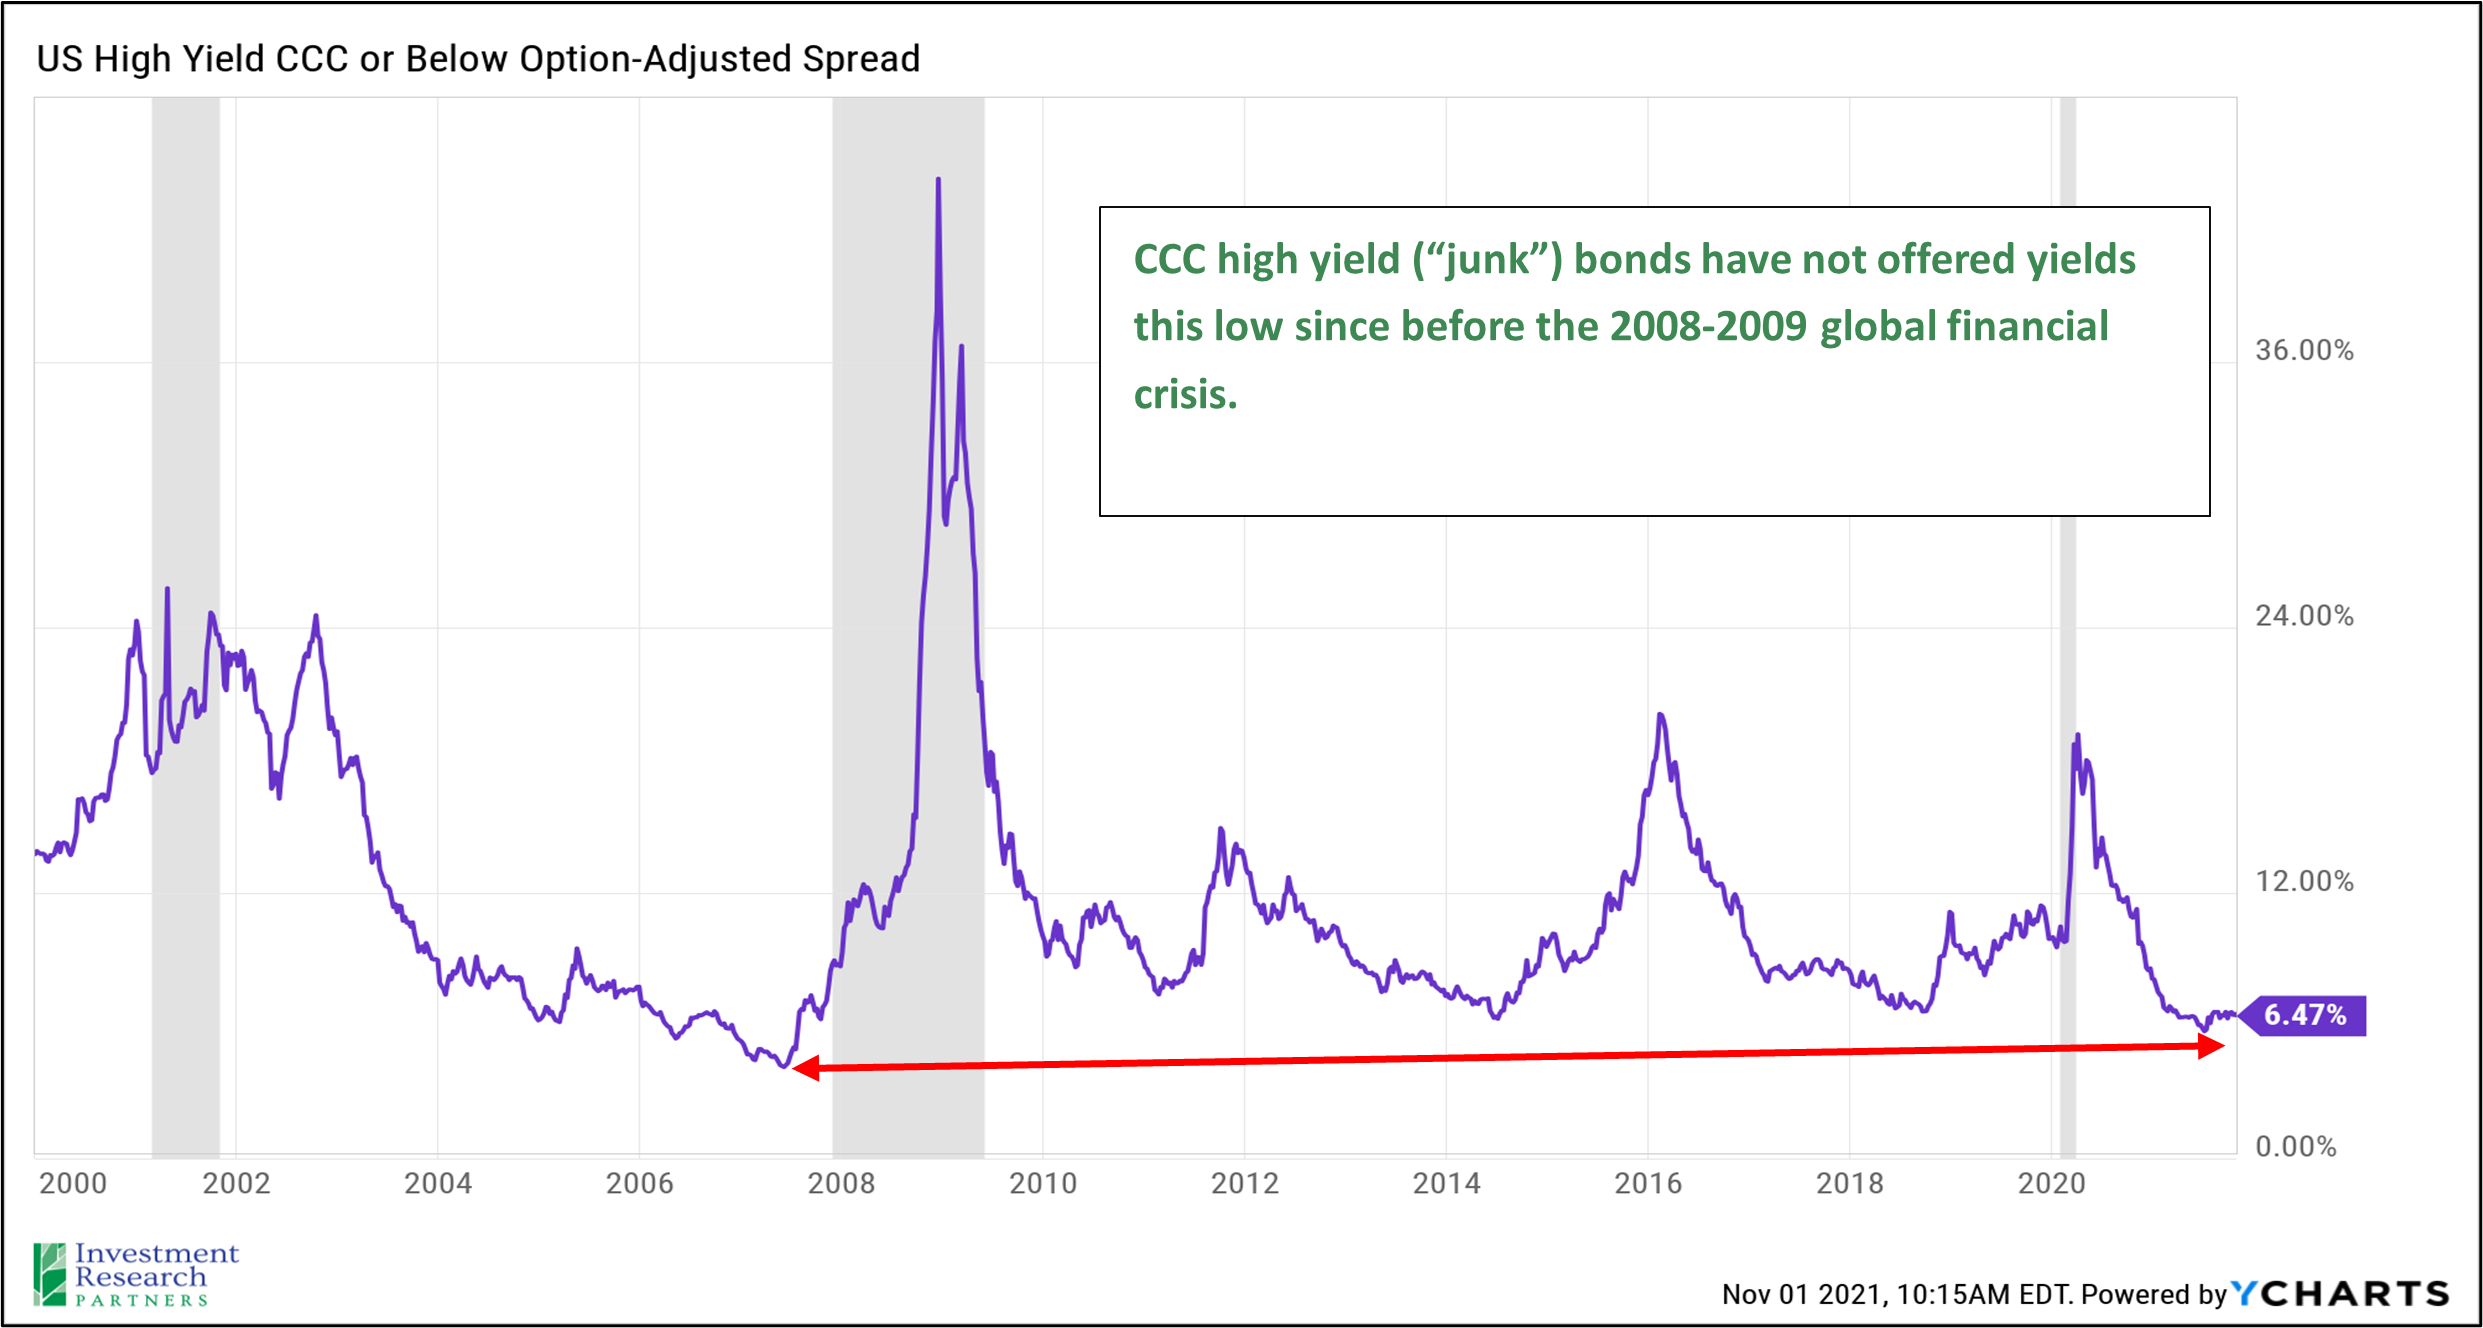 Line graph depicting US High Yield CCC or Below Option-Adjusted Spread from 2000 to 2021 with text reading: CCC high yield (